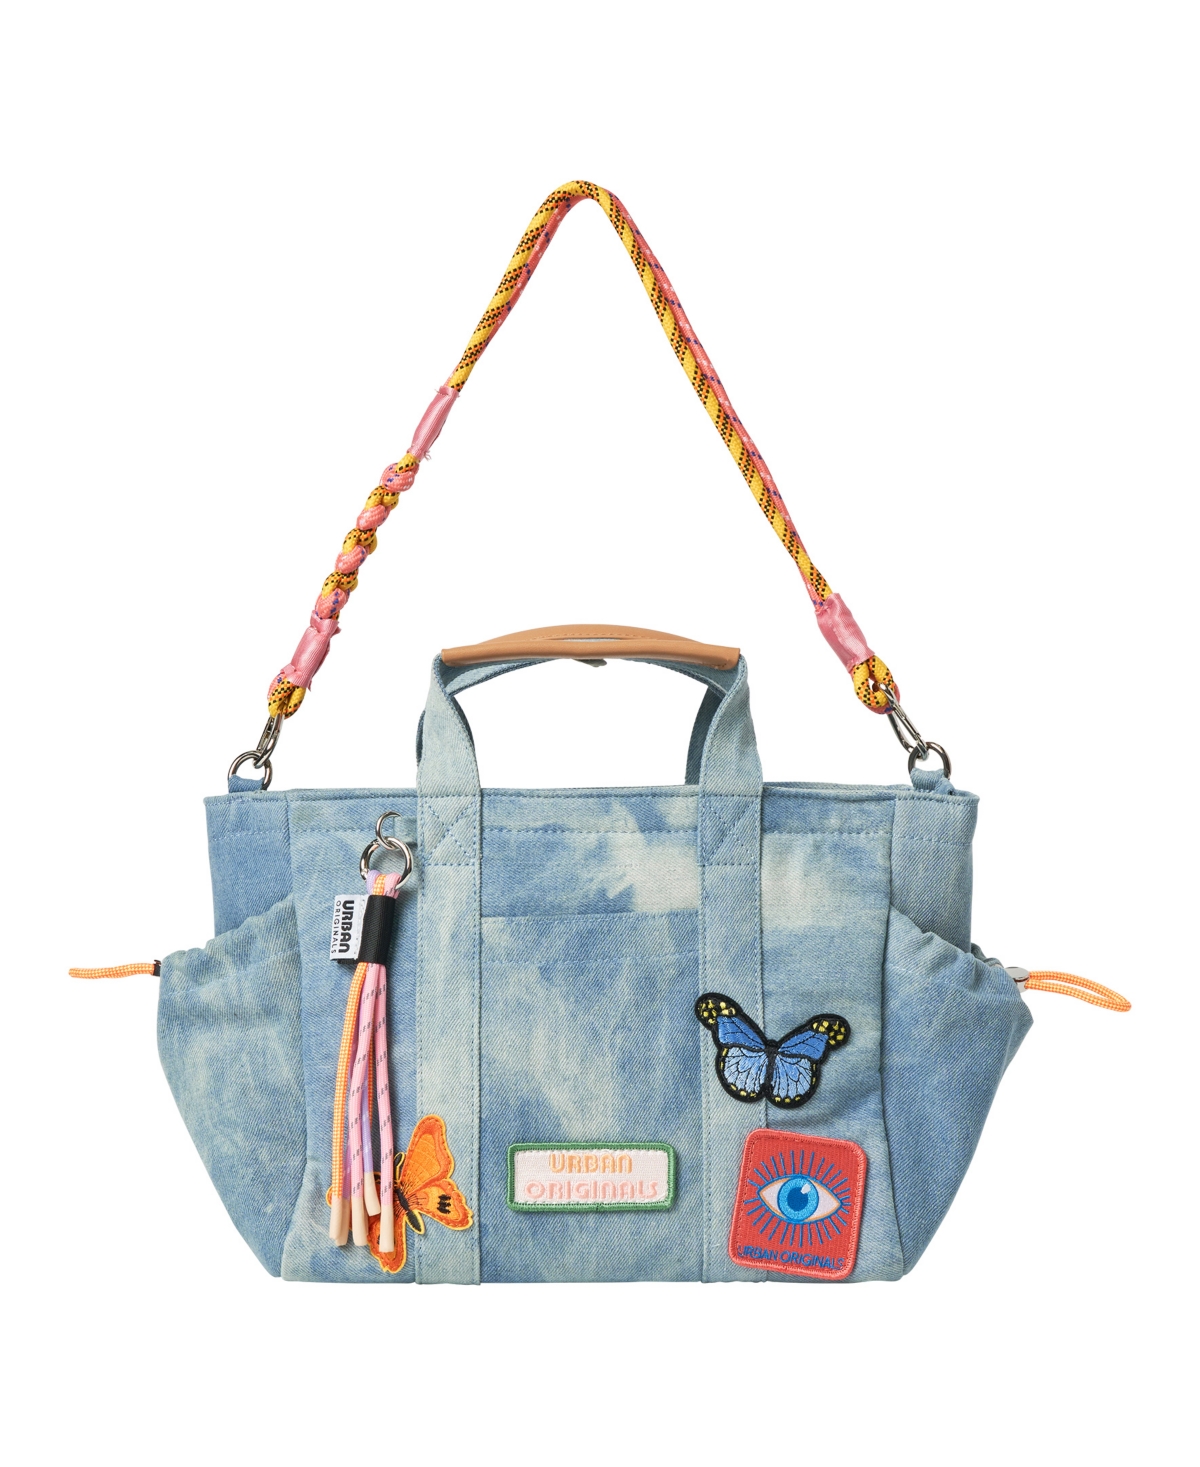 Butterfly Small Tote Bag - Blue